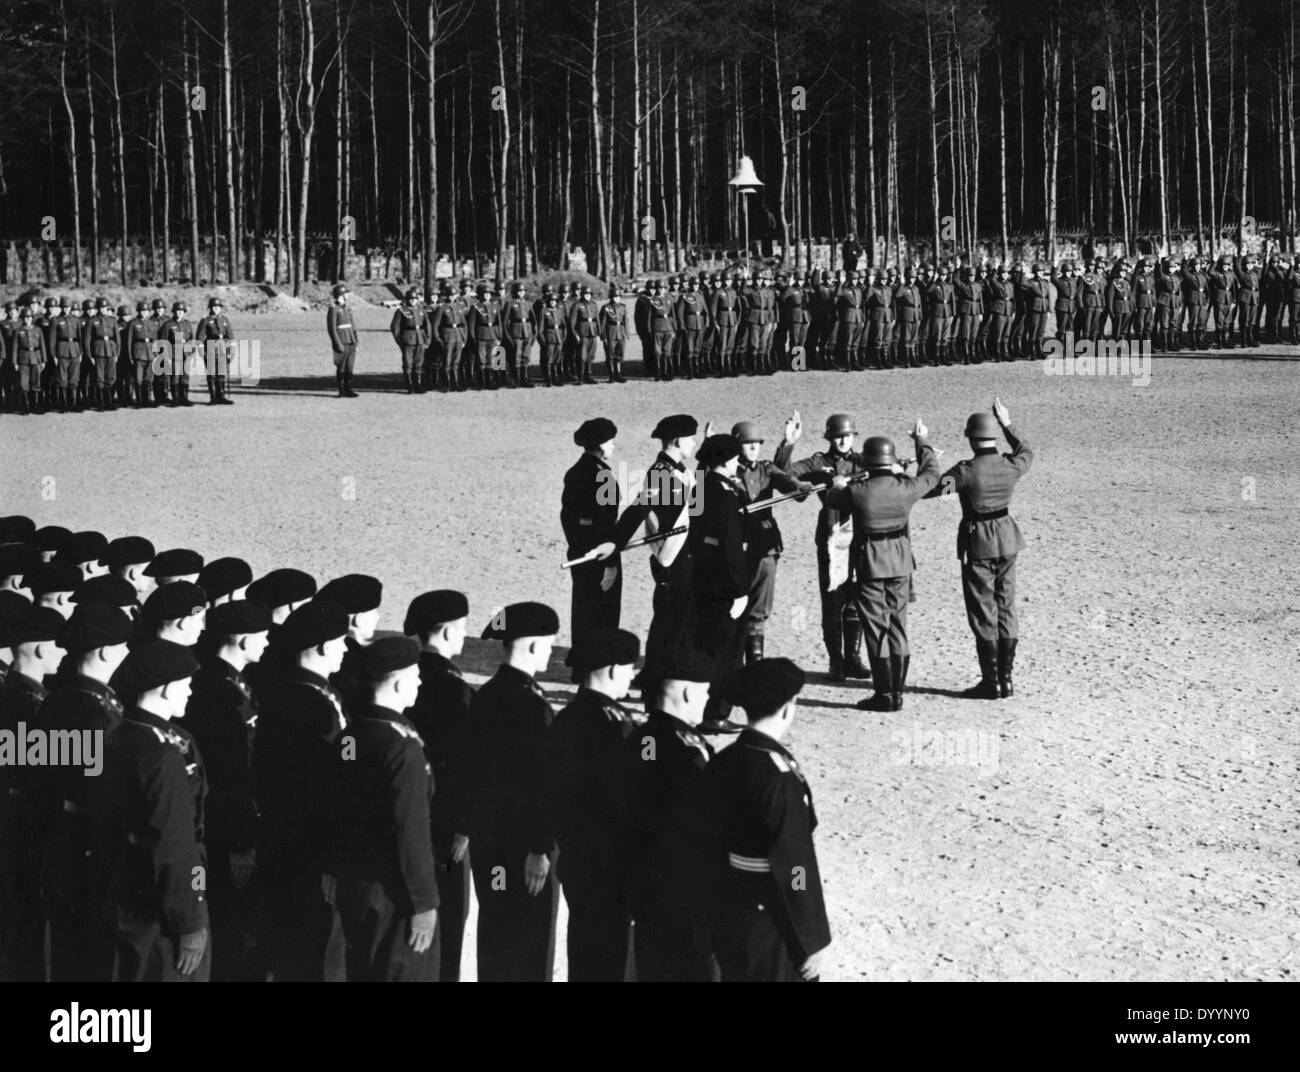 Swearing in of recruits of the Armed Forces, 1938 Stock Photo